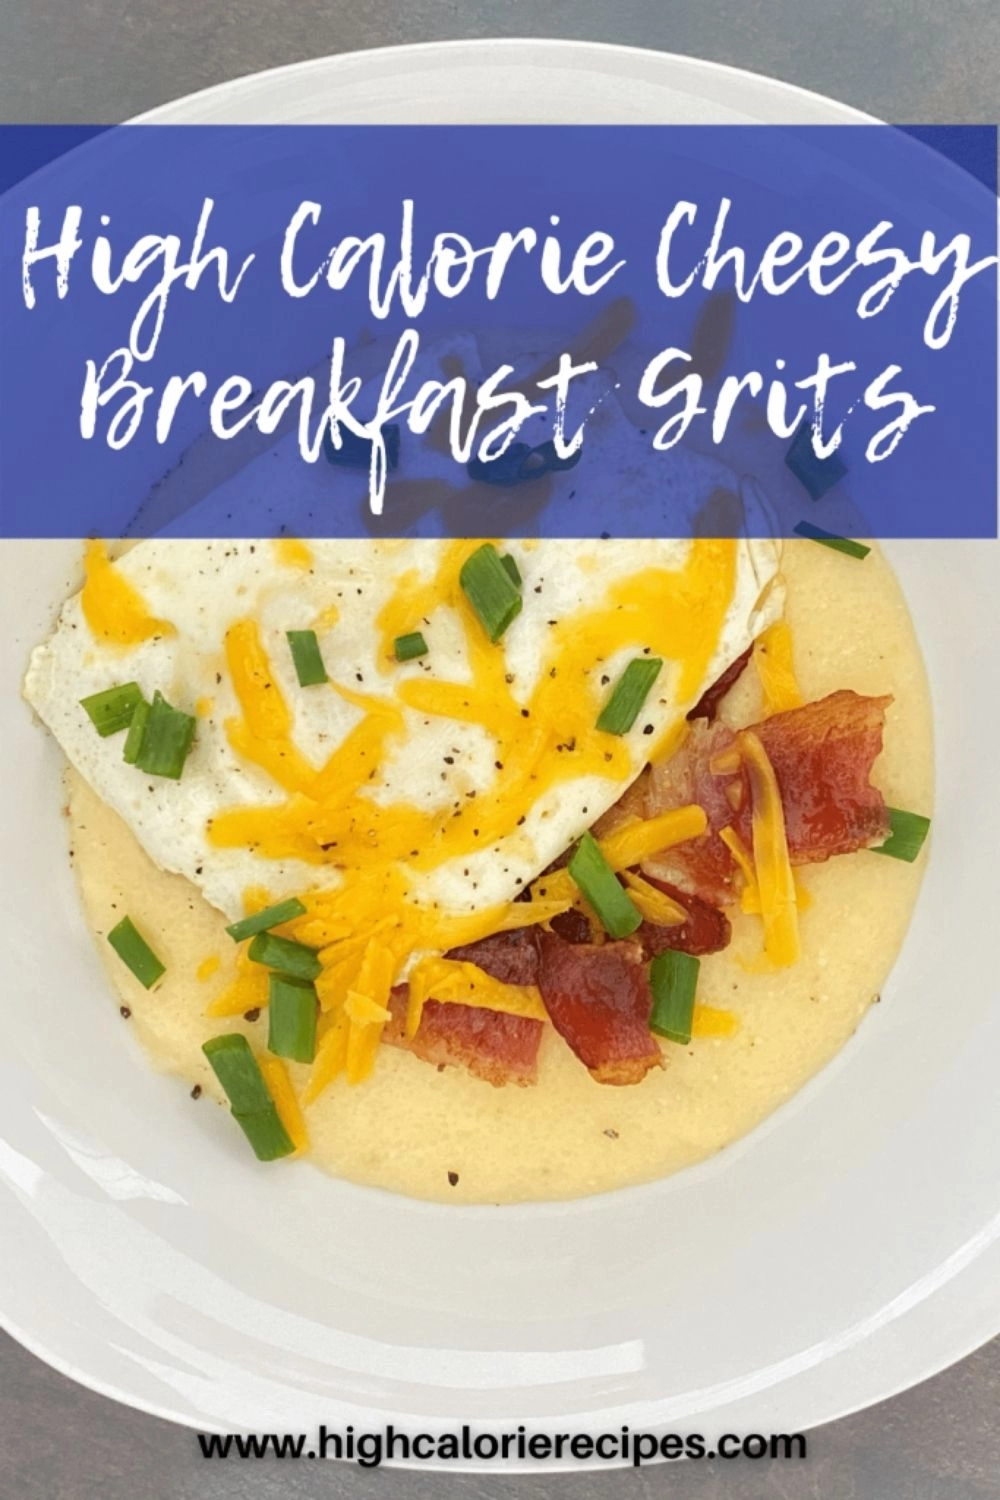 High Calorie Cheesy Grits